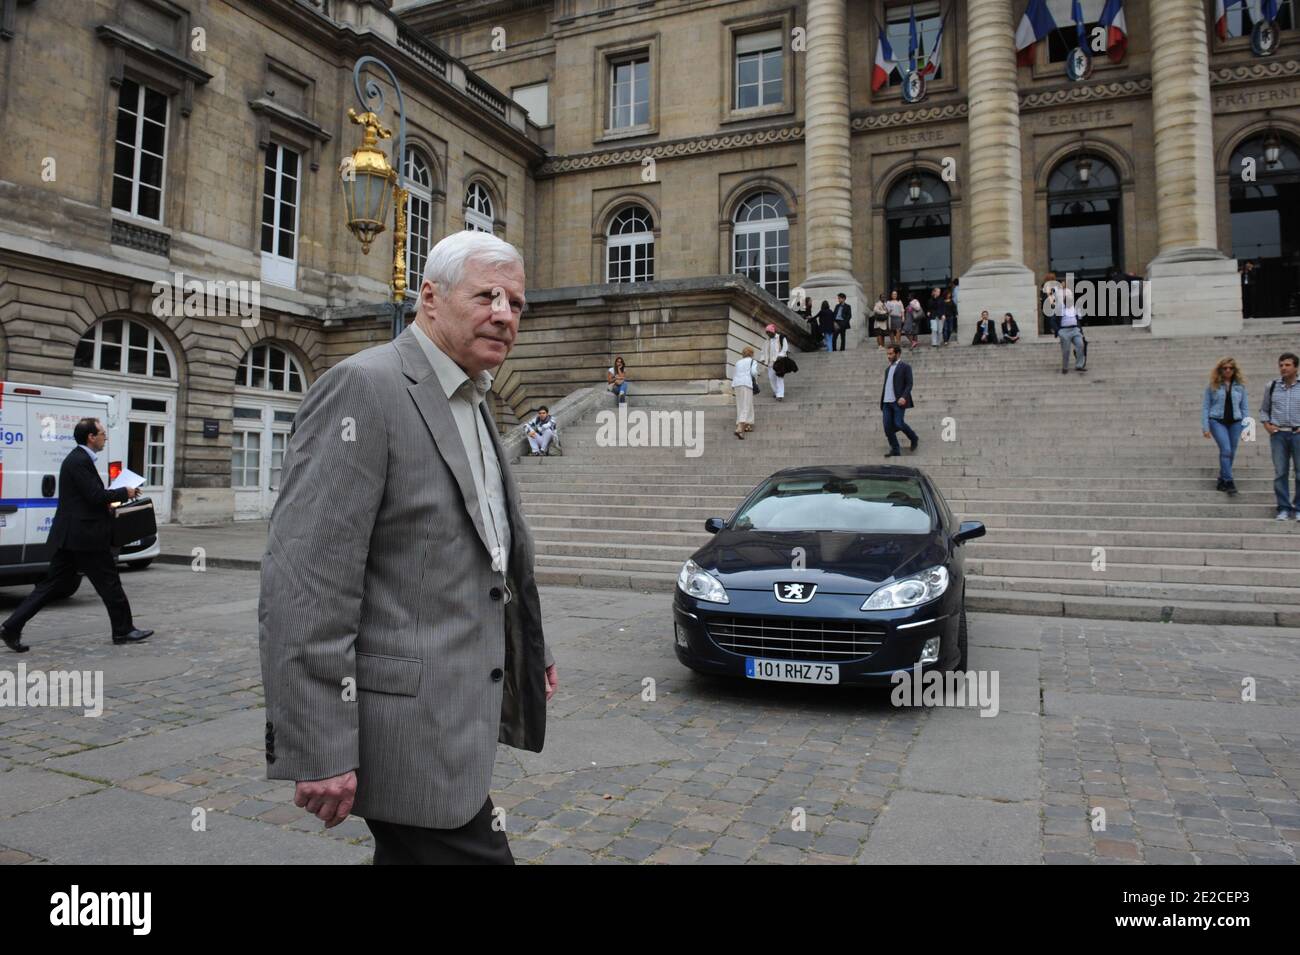 Frenchman Andre Bamberski pictured at the Palais de Justice for German cardiologist Dieter Krombach's trial for the murder of Kalinka Bamberski, in Paris, France on October 4, 2011. The French court today decided to continue the trial of the German doctor, who is accused of having raped and killed his then 14-year-old stepdaughter, Kalinka Bamberski, in the summer of 1982 while she was holidaying with her mother at Krombach's home at Lake Constance, southern Germany. A court in Germany ruled that Krombach could not be held responsible for the death, but in 1995 a court in Paris found the docto Stock Photo